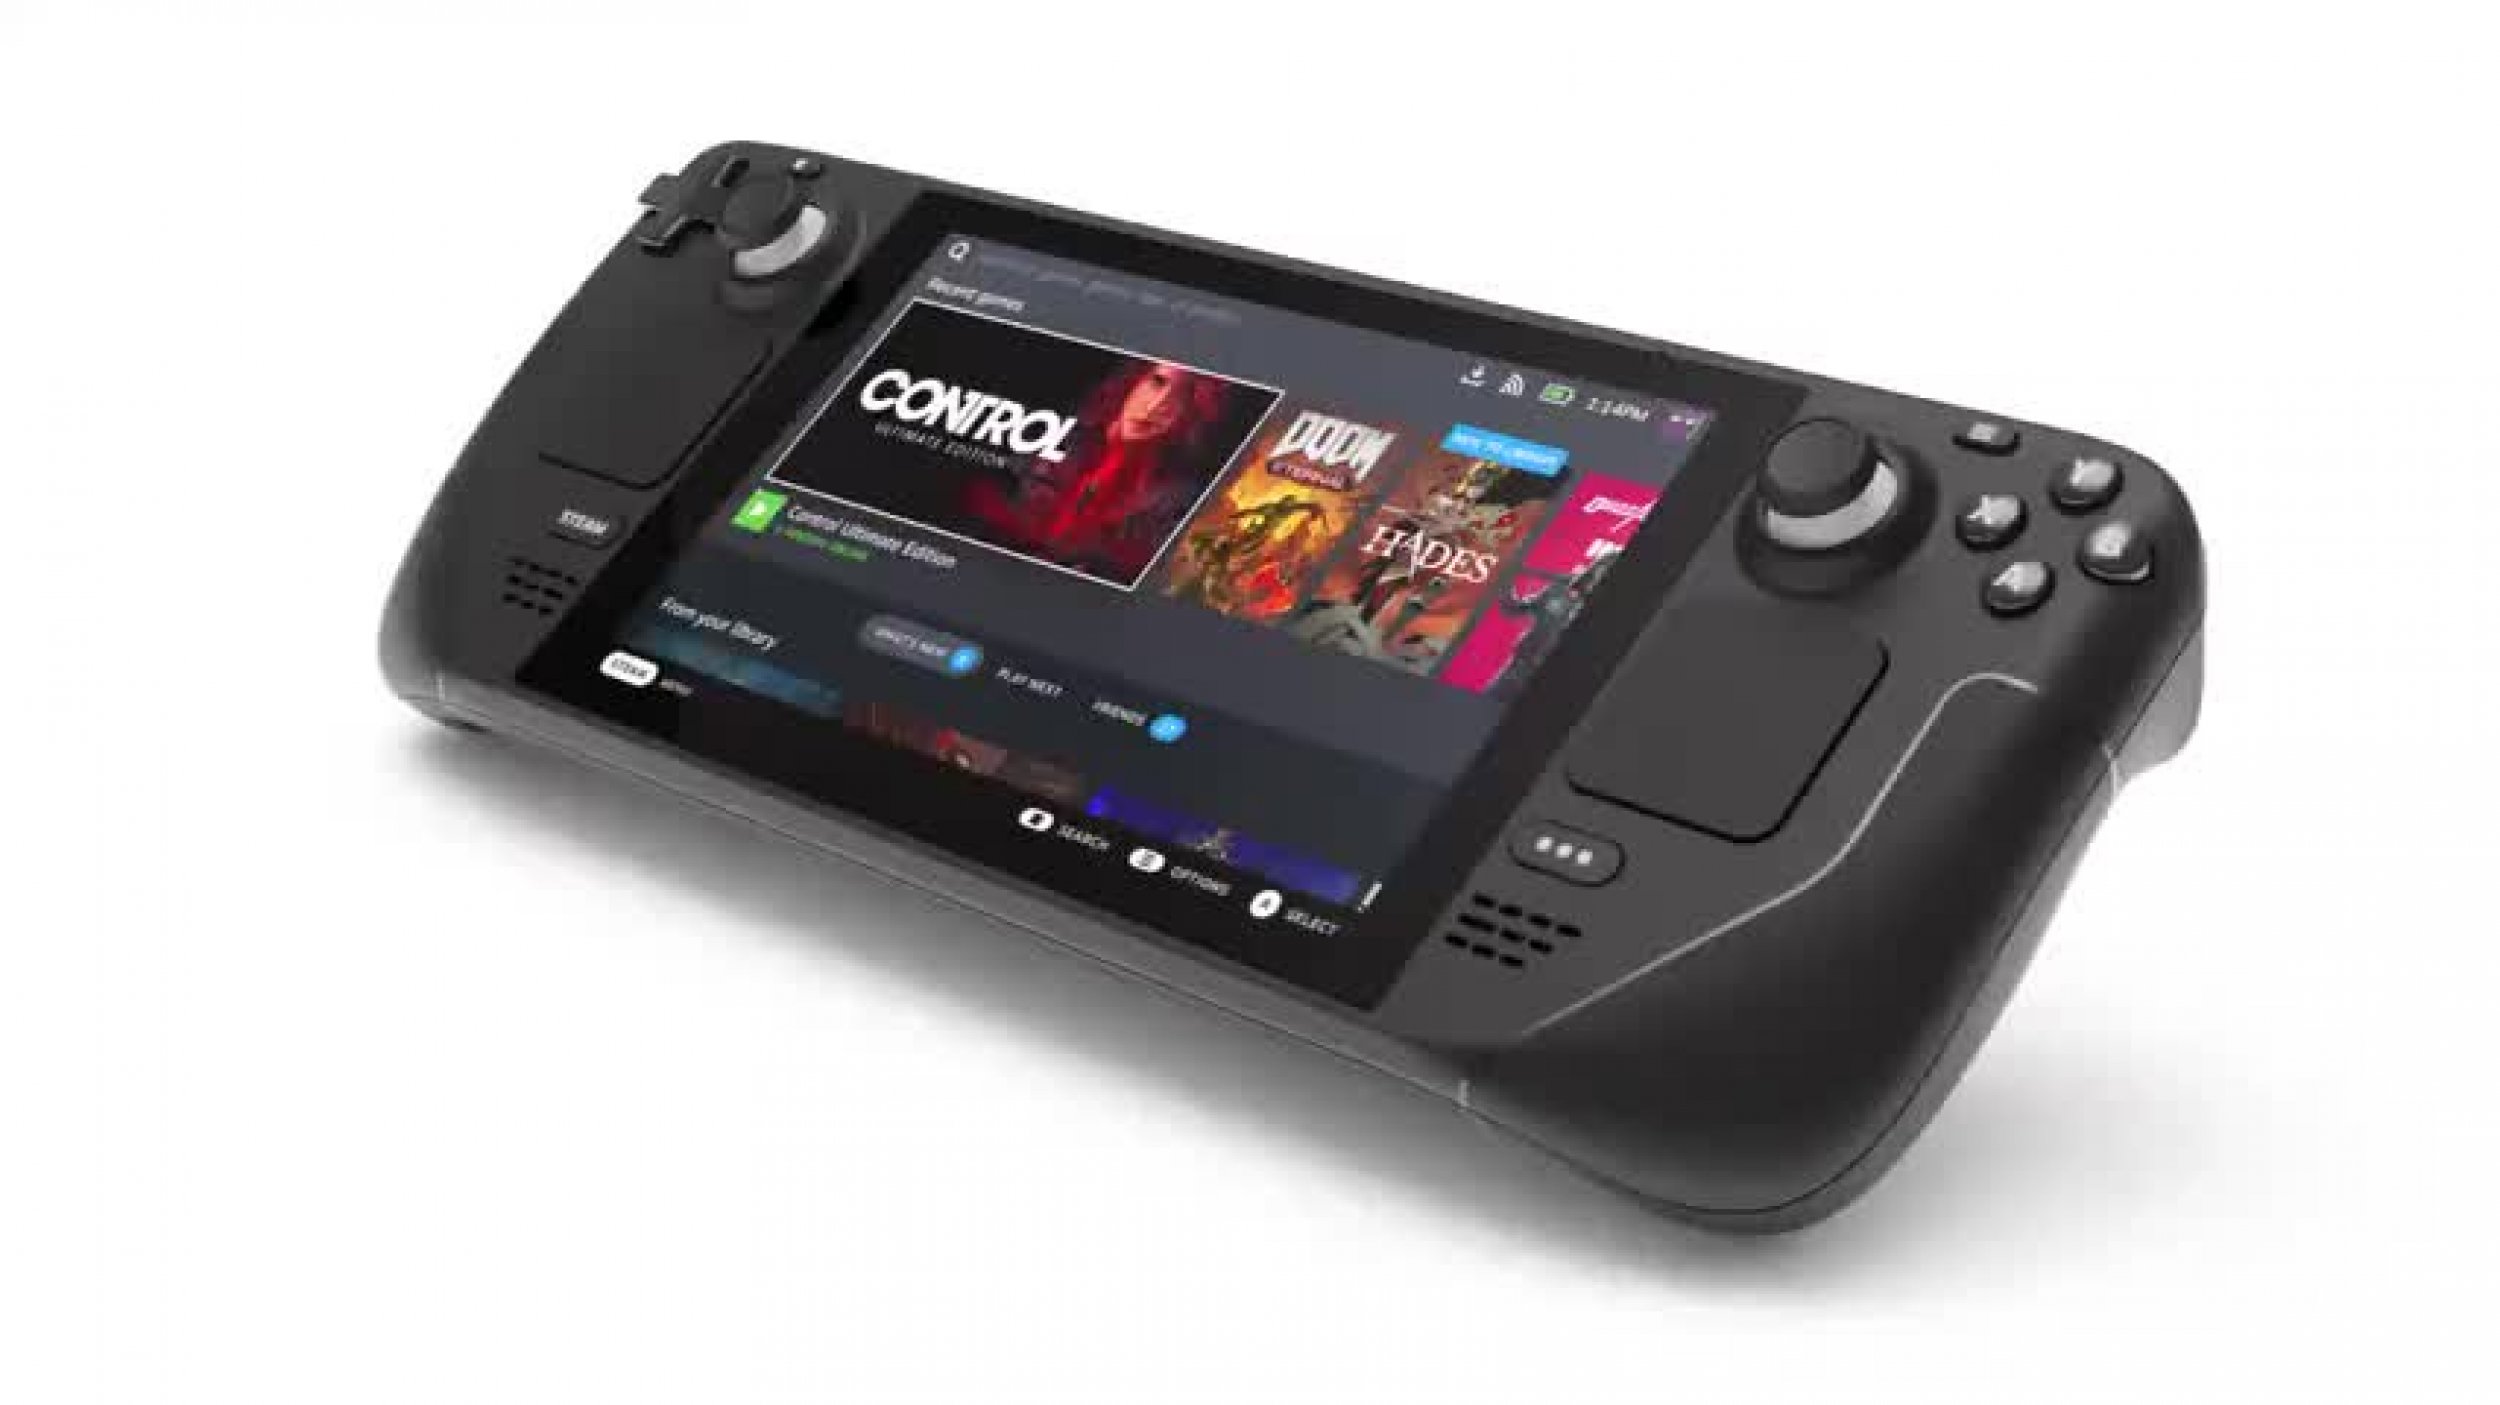 team Deck Pre-orders When Do Pre-orders Open for the Handheld PC